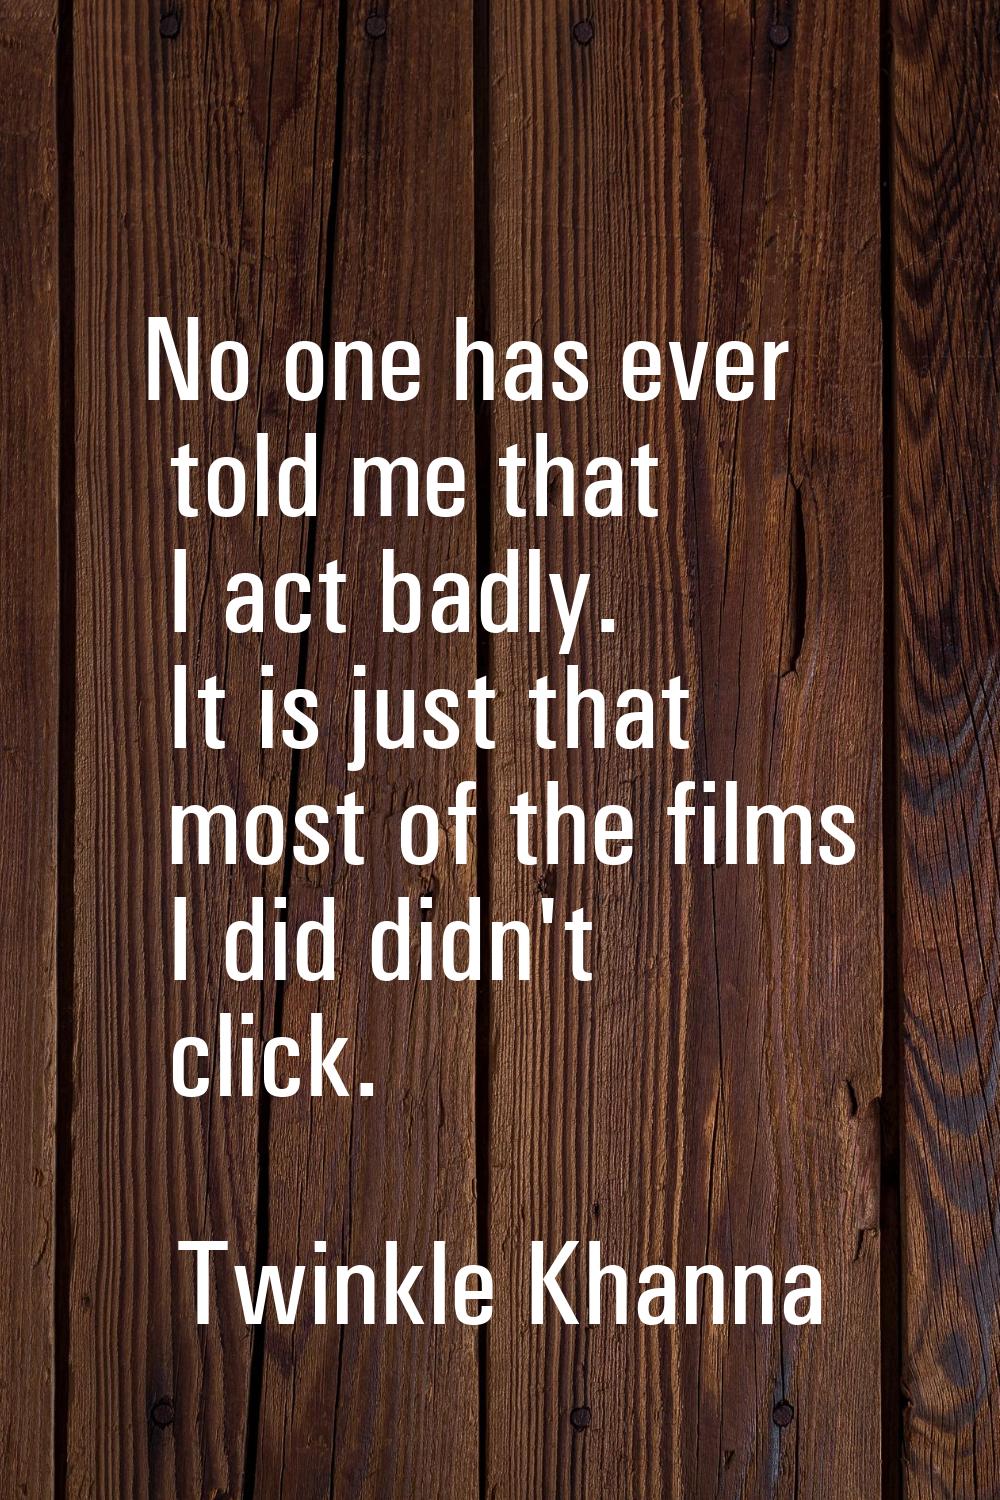 No one has ever told me that I act badly. It is just that most of the films I did didn't click.